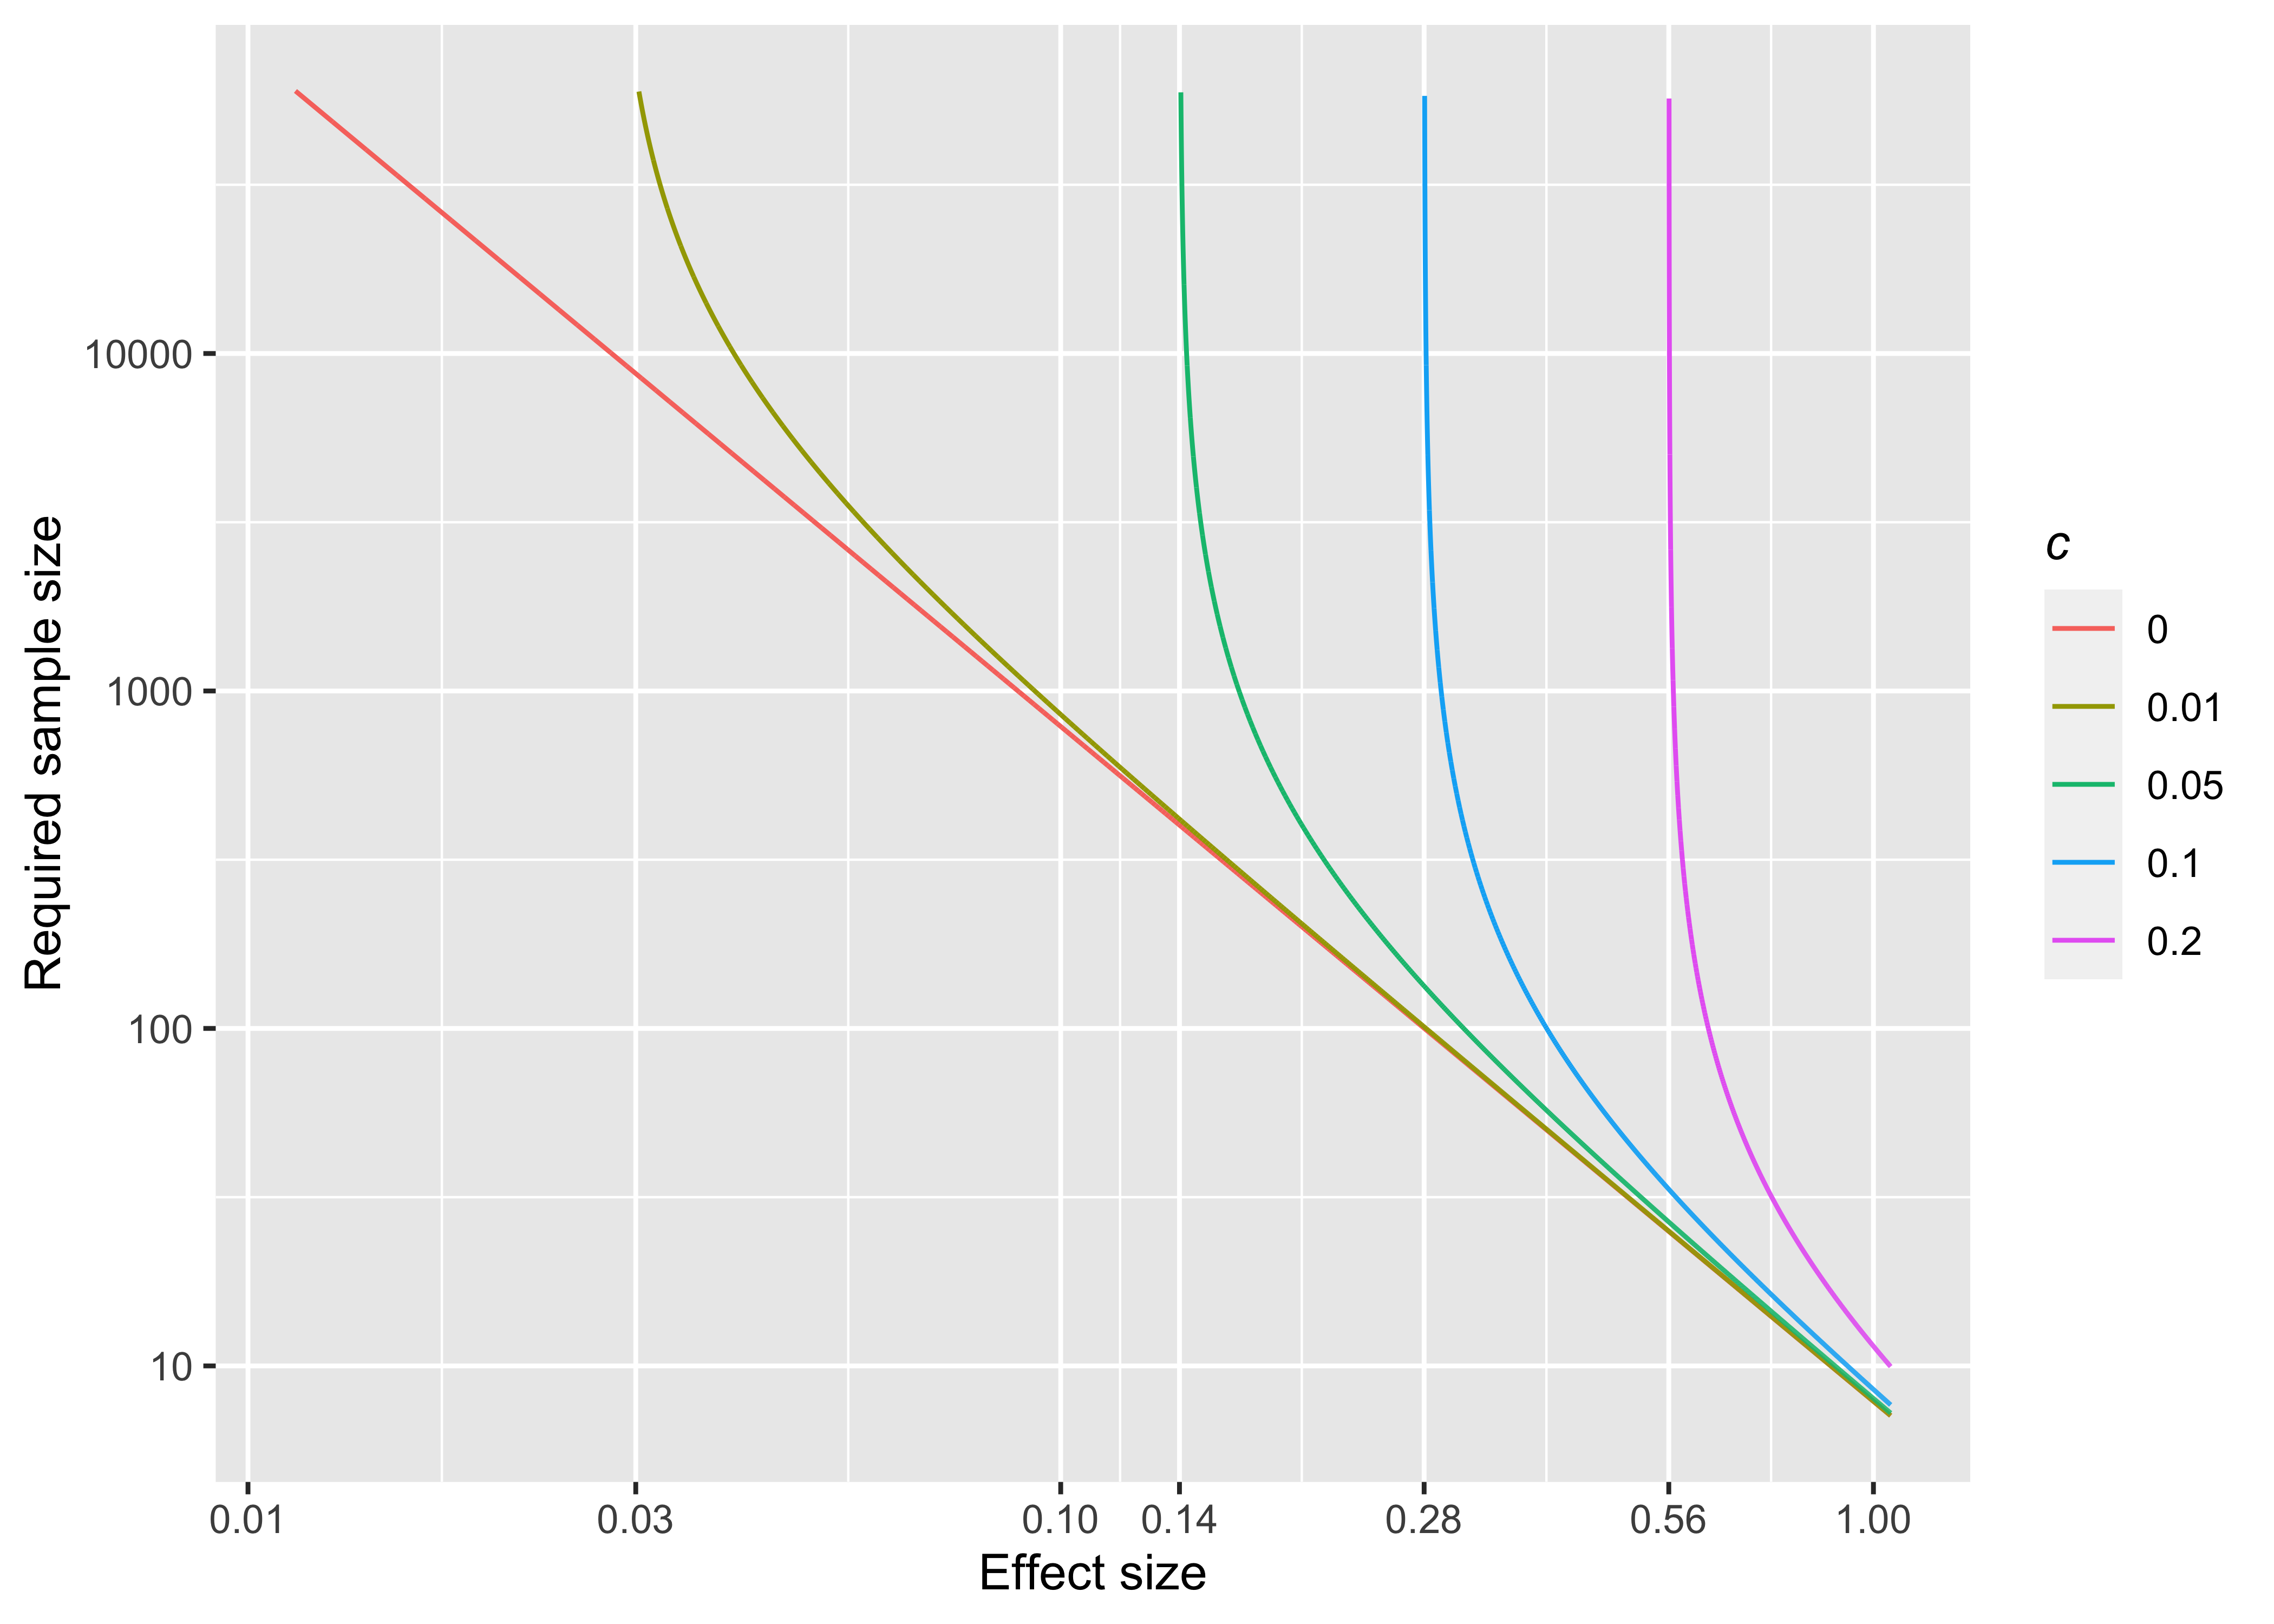 Required sample size according effect size in some uncertainty scenarios: $\alpha=0.05$, $1-\beta=0.8$ 